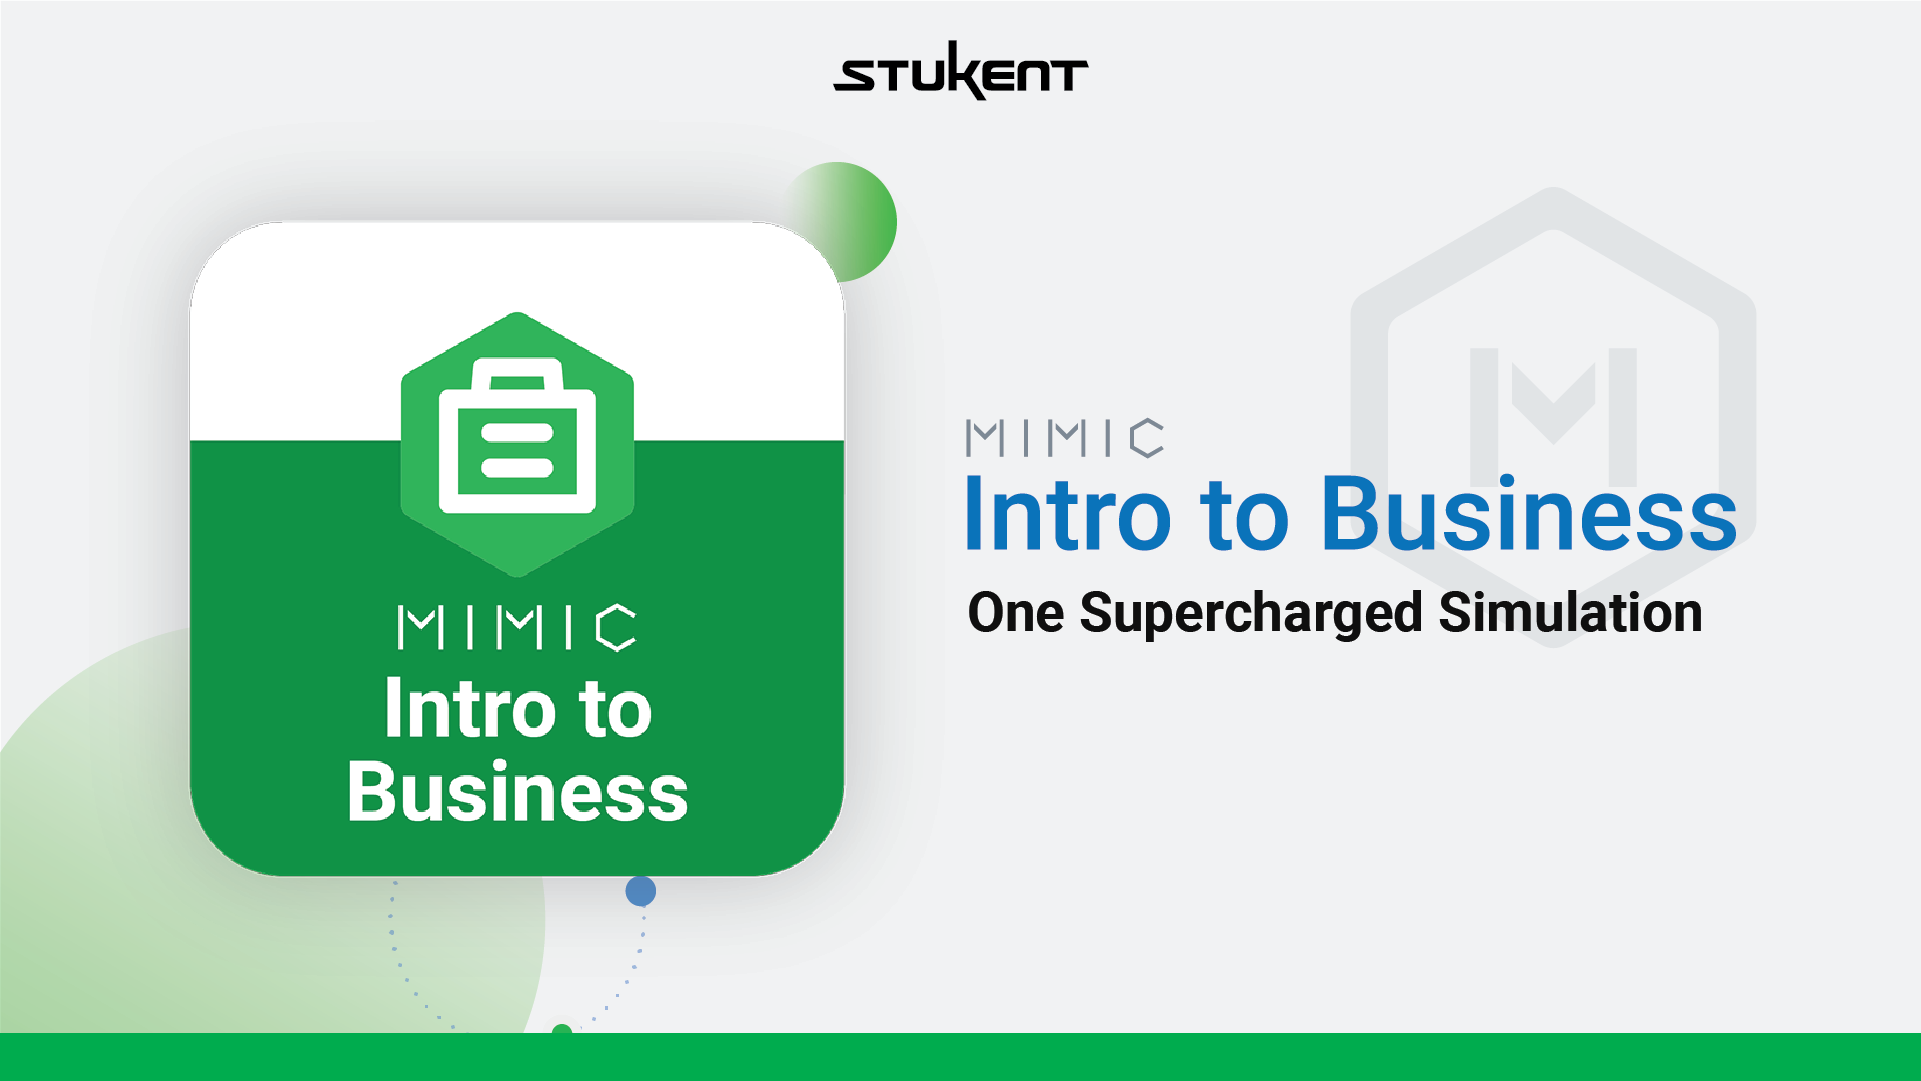 Mimic Intro to Business Launch Webinar